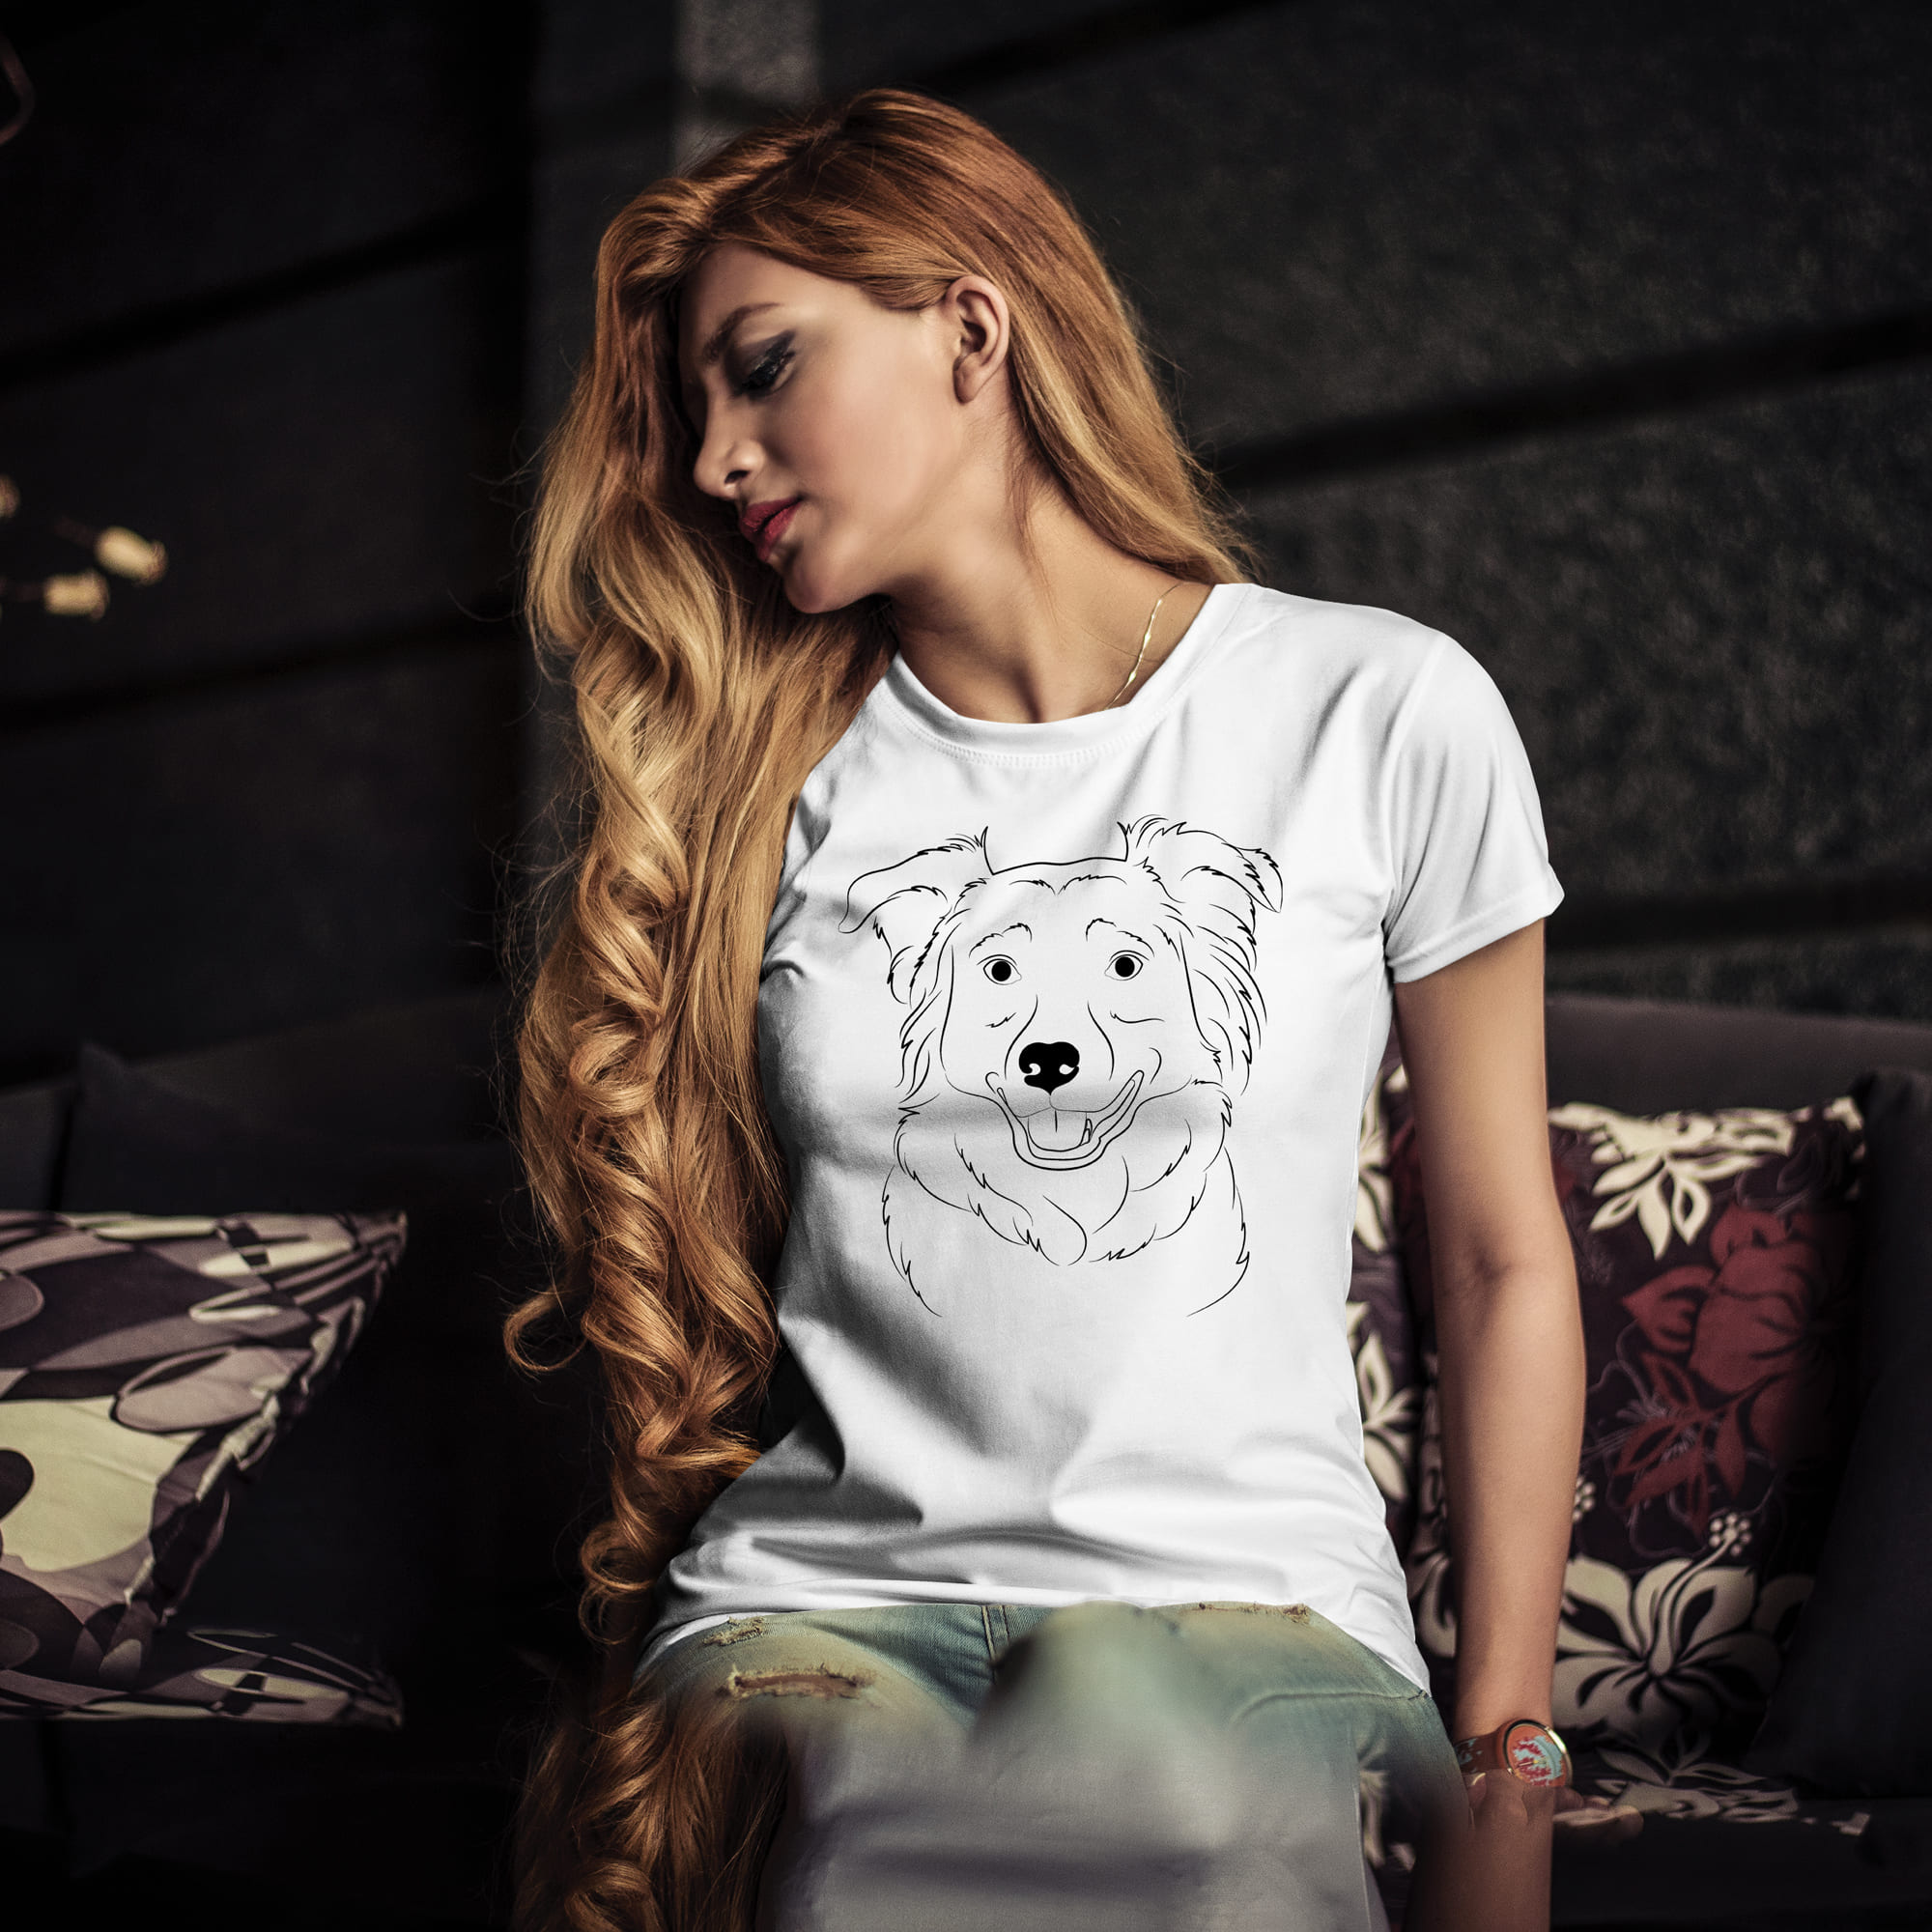 Woman sitting on a couch wearing a t - shirt with a dog on it.